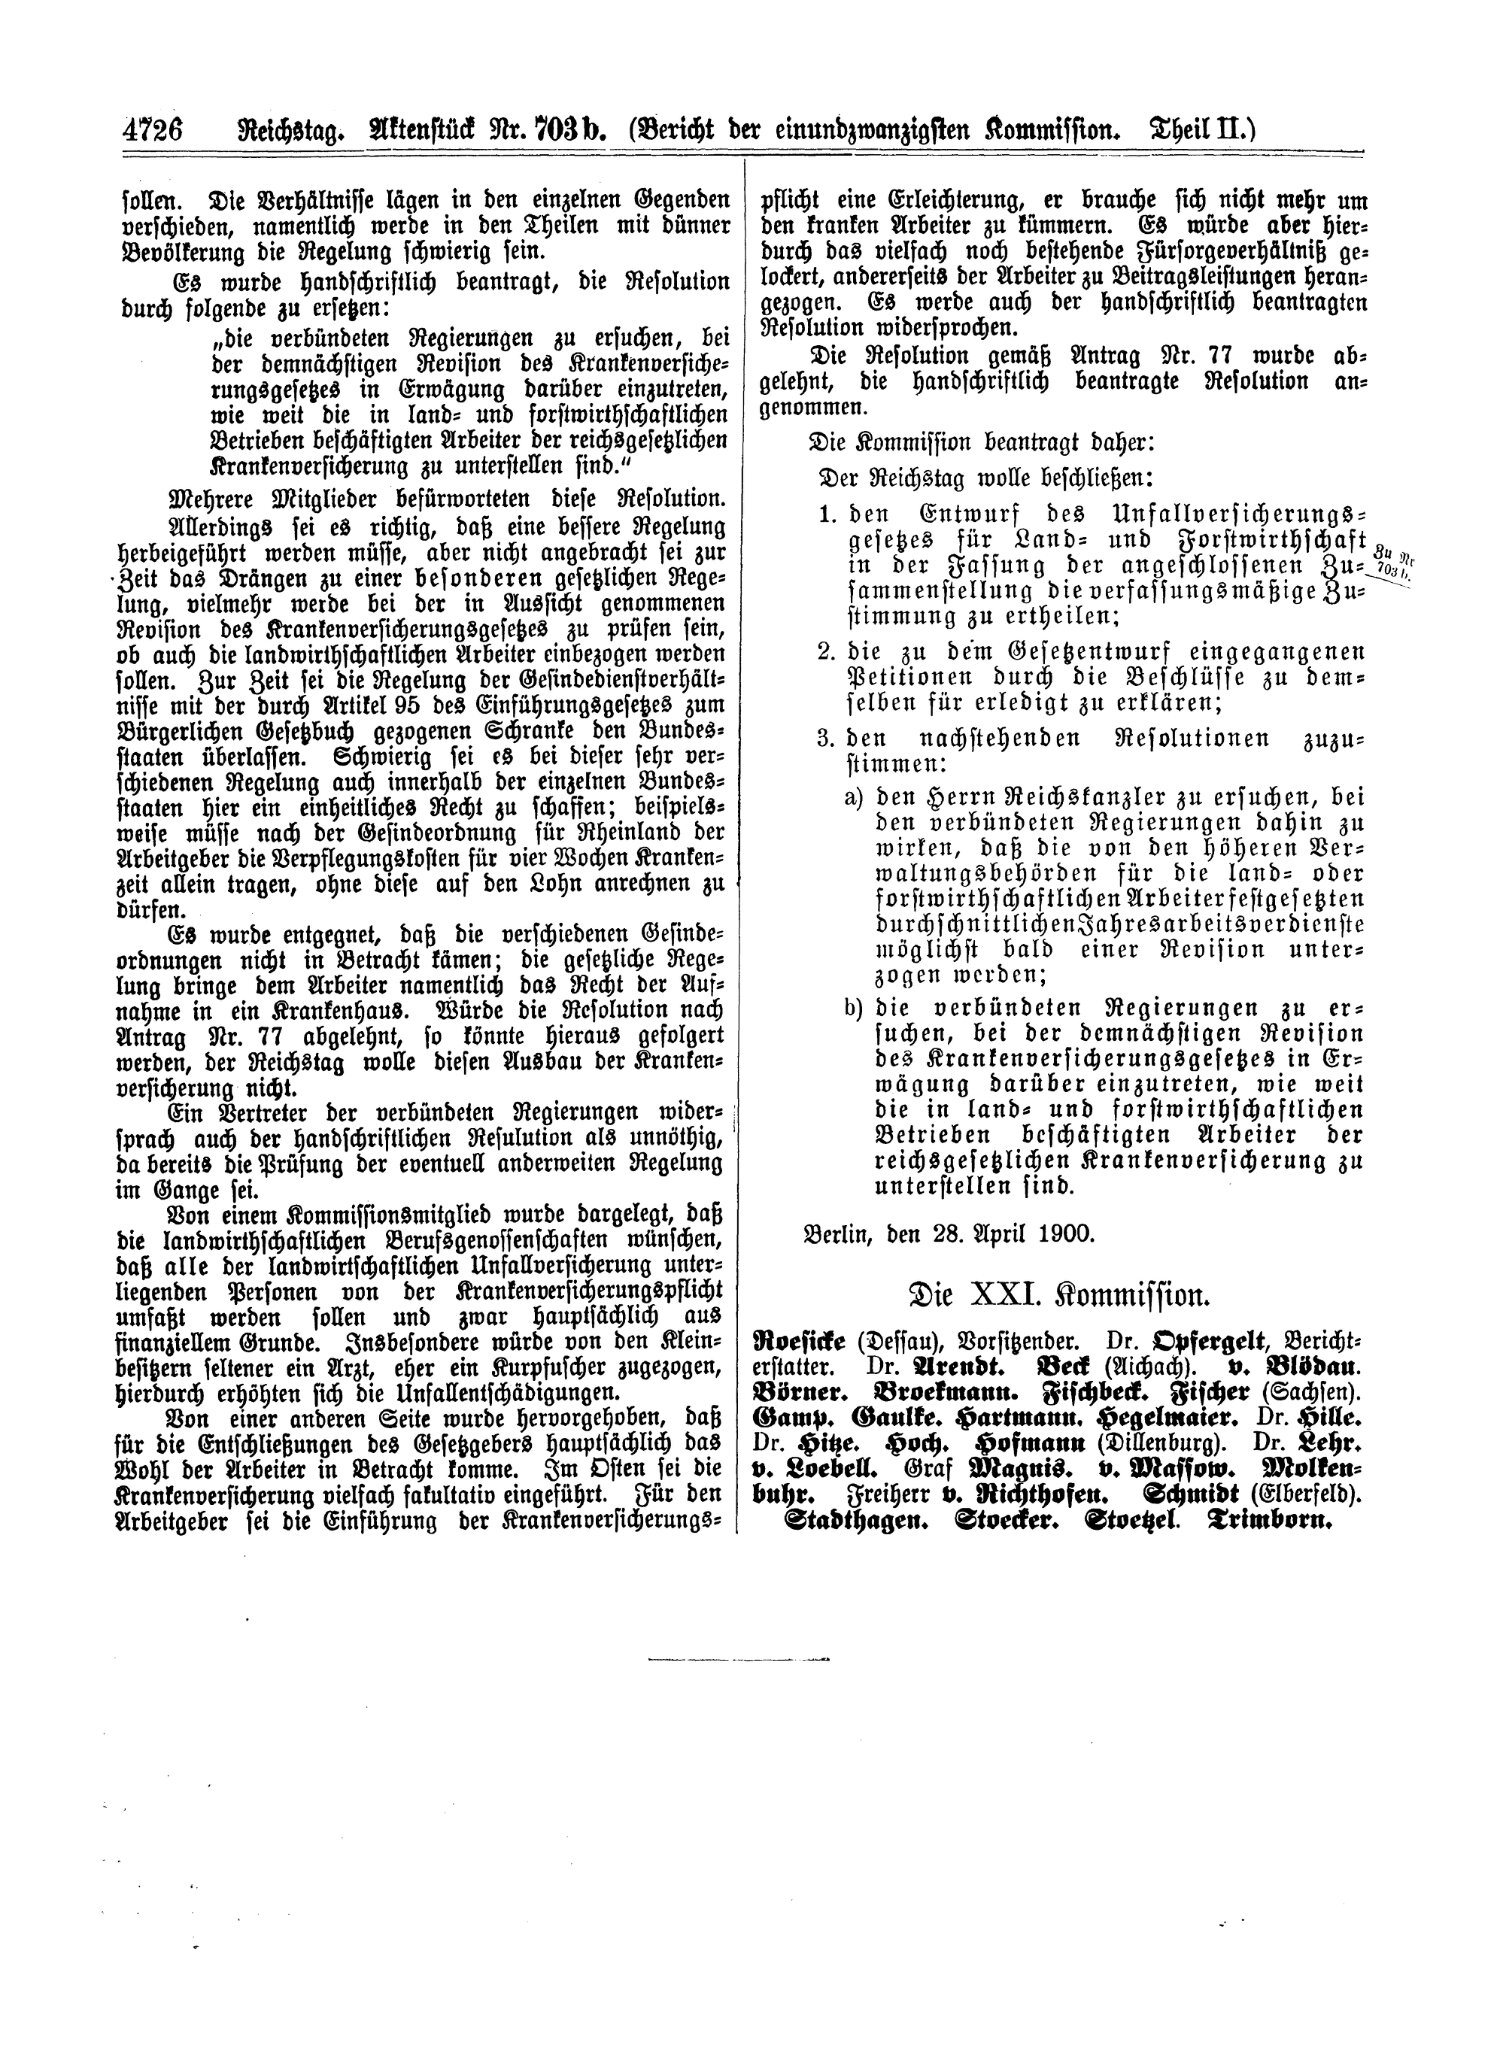 Scan of page 4726